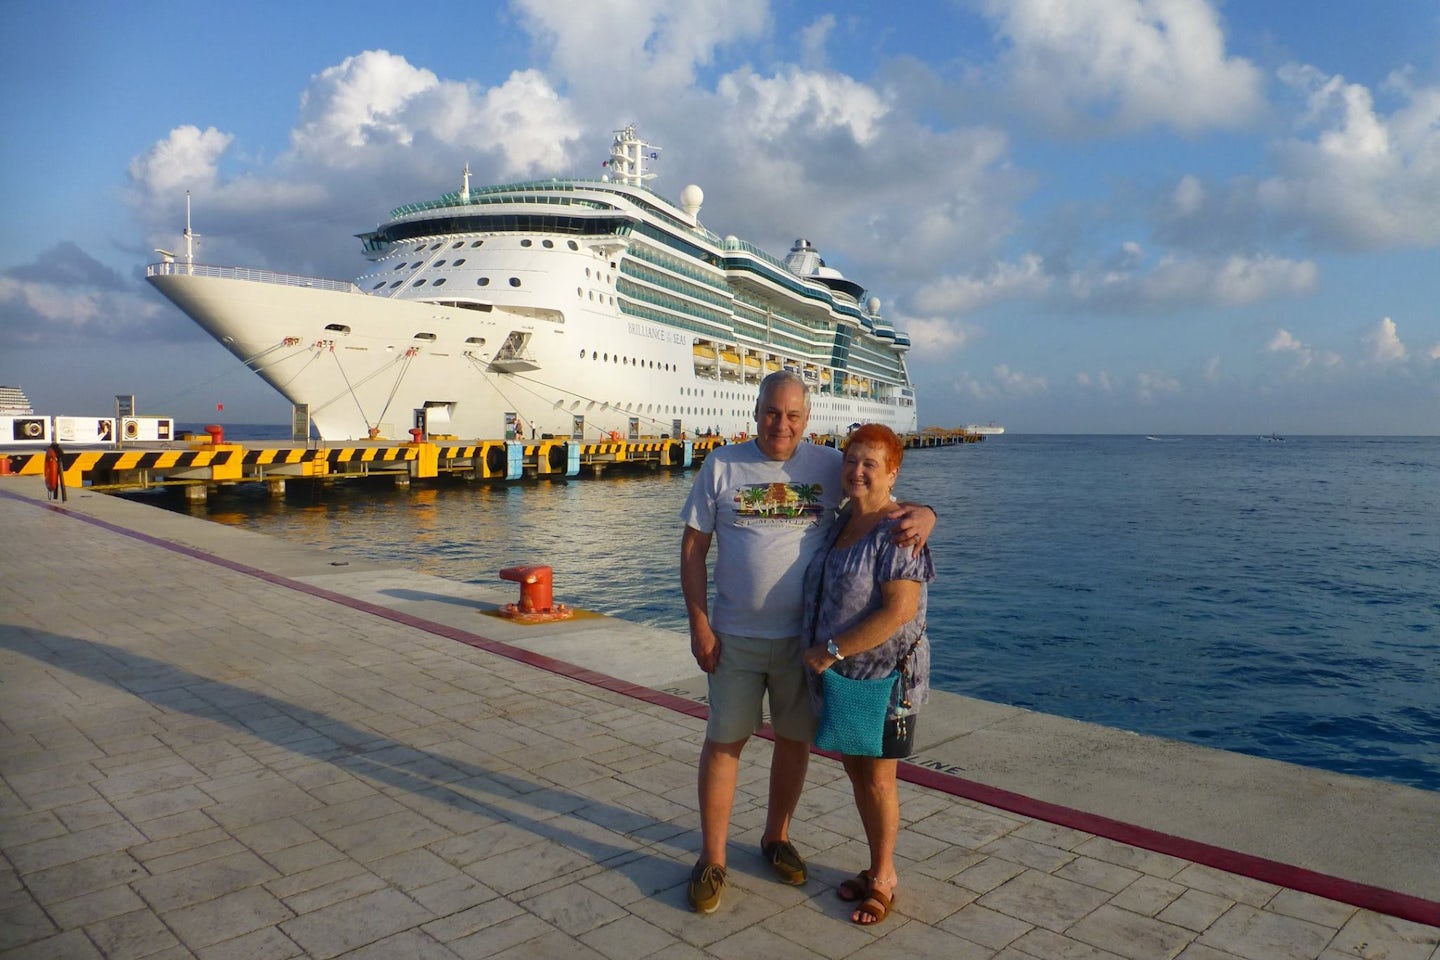 Brilliance of the Seas docked in Cozumel.